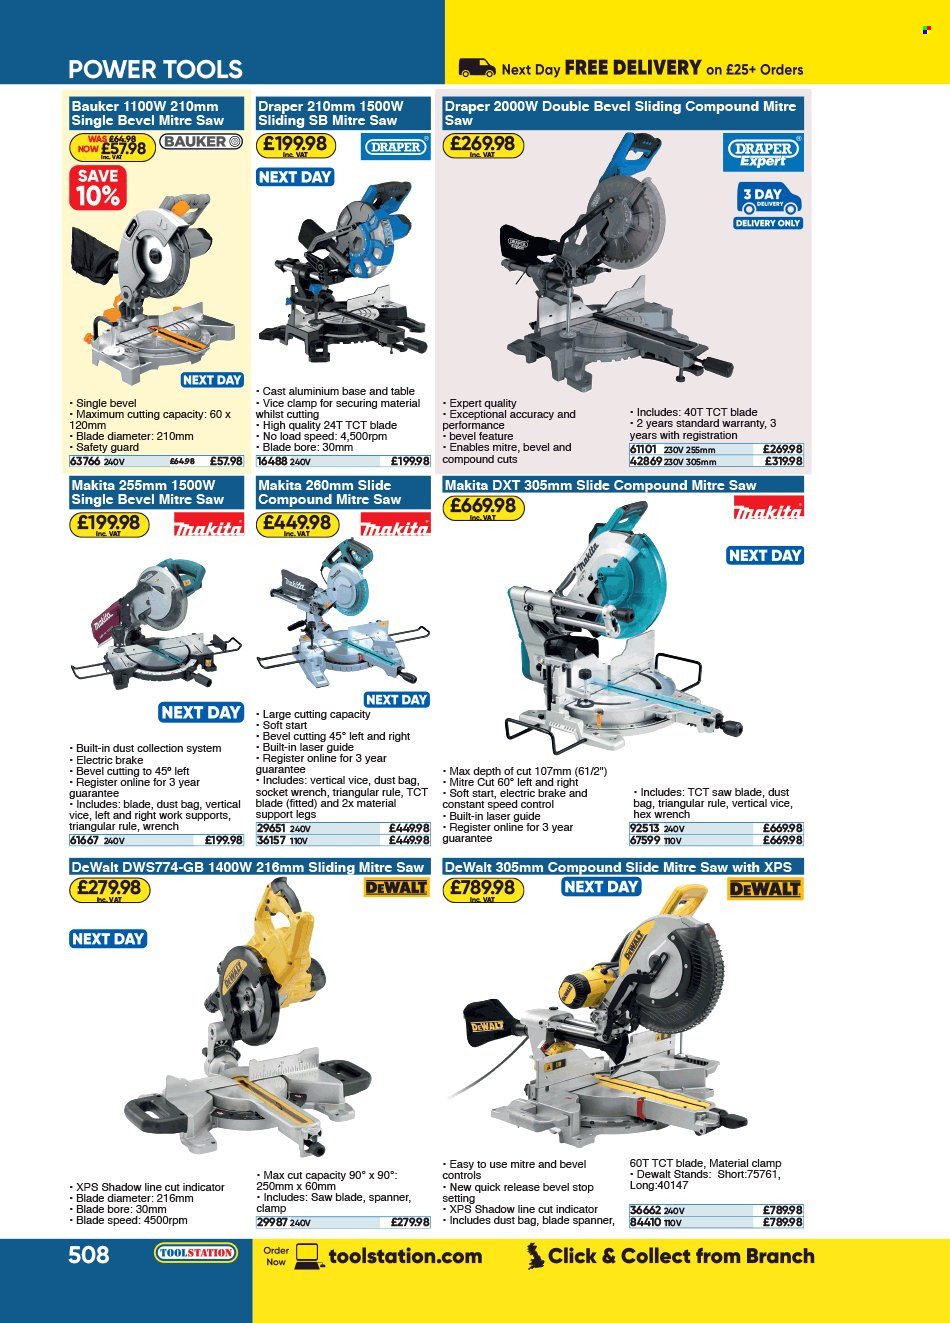 thumbnail - Toolstation offer  - Sales products - DeWALT, power tools, Makita, saw, table. Page 508.